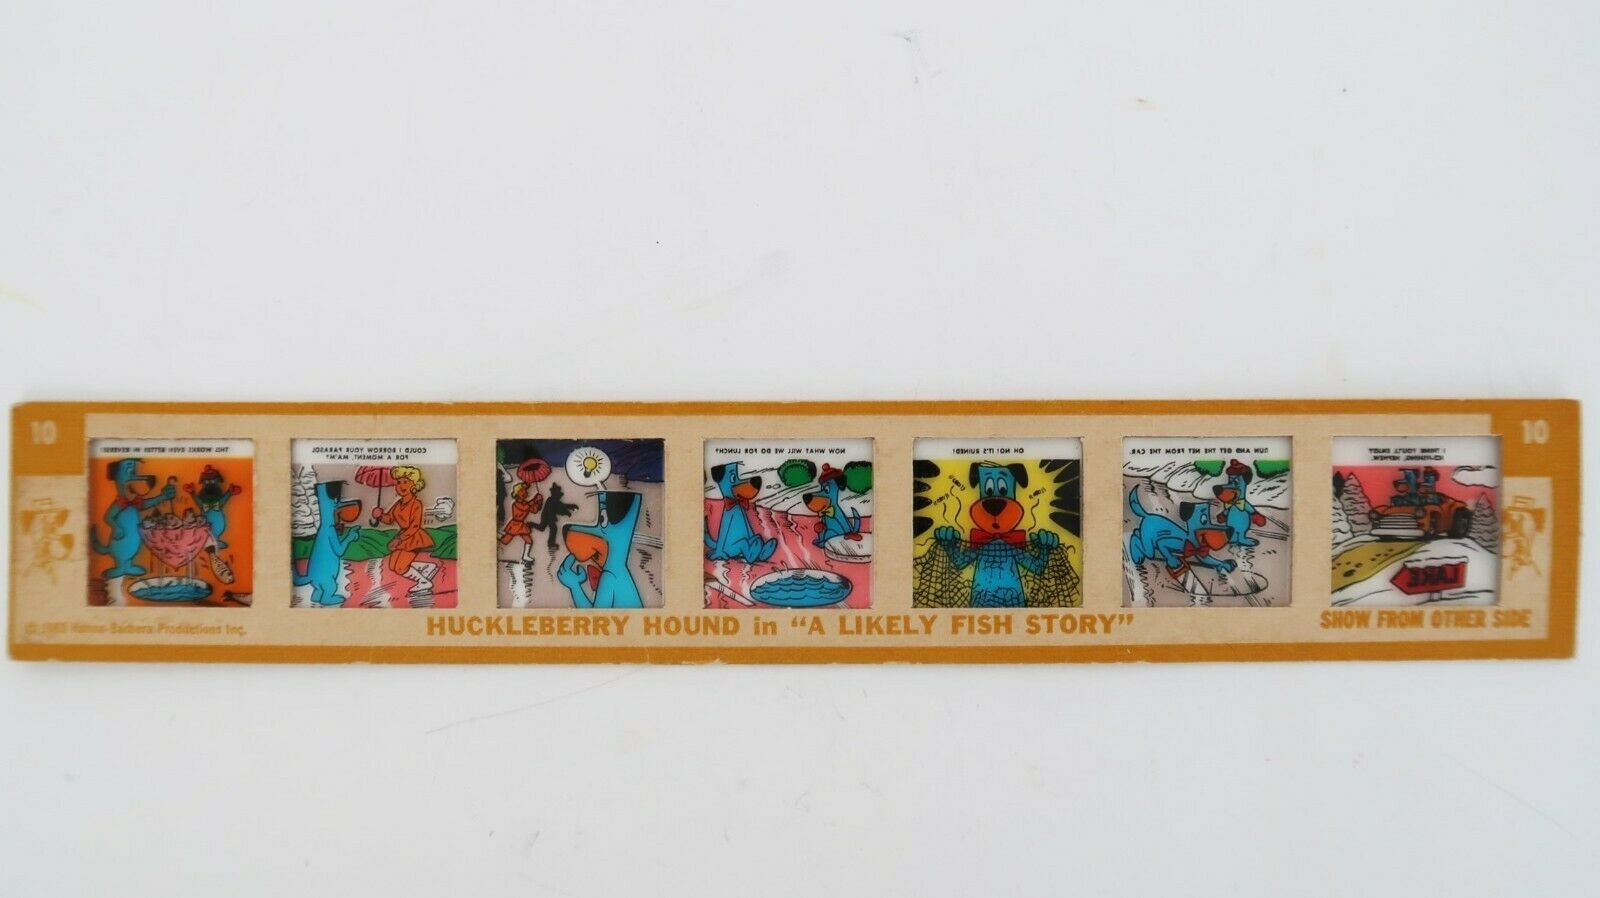 1969 Kenner Give A Show Projector Huckleberry Hound "A Likely Fish Story" slide - $9.99